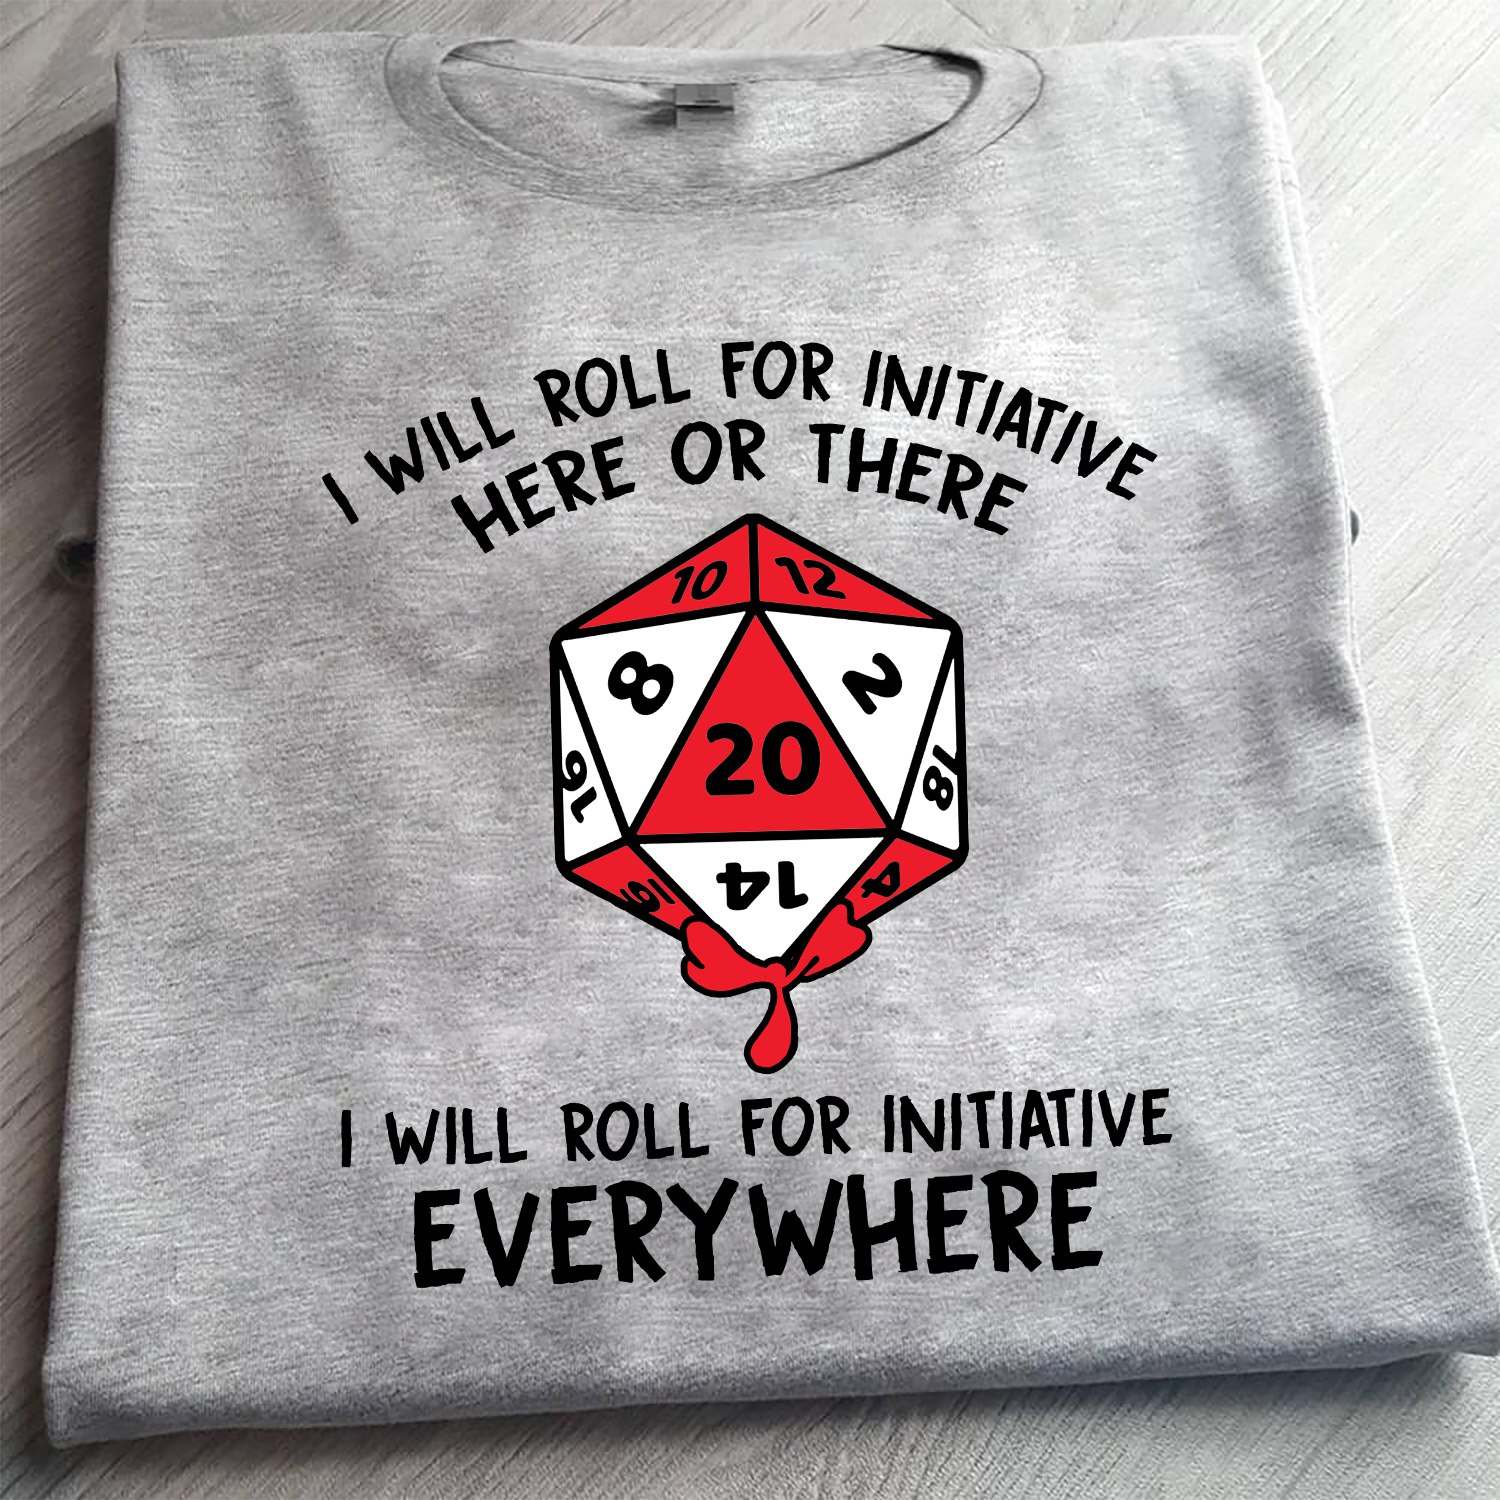 I will roll for initiative here or there I will roll for initiative everywhere - D&d game